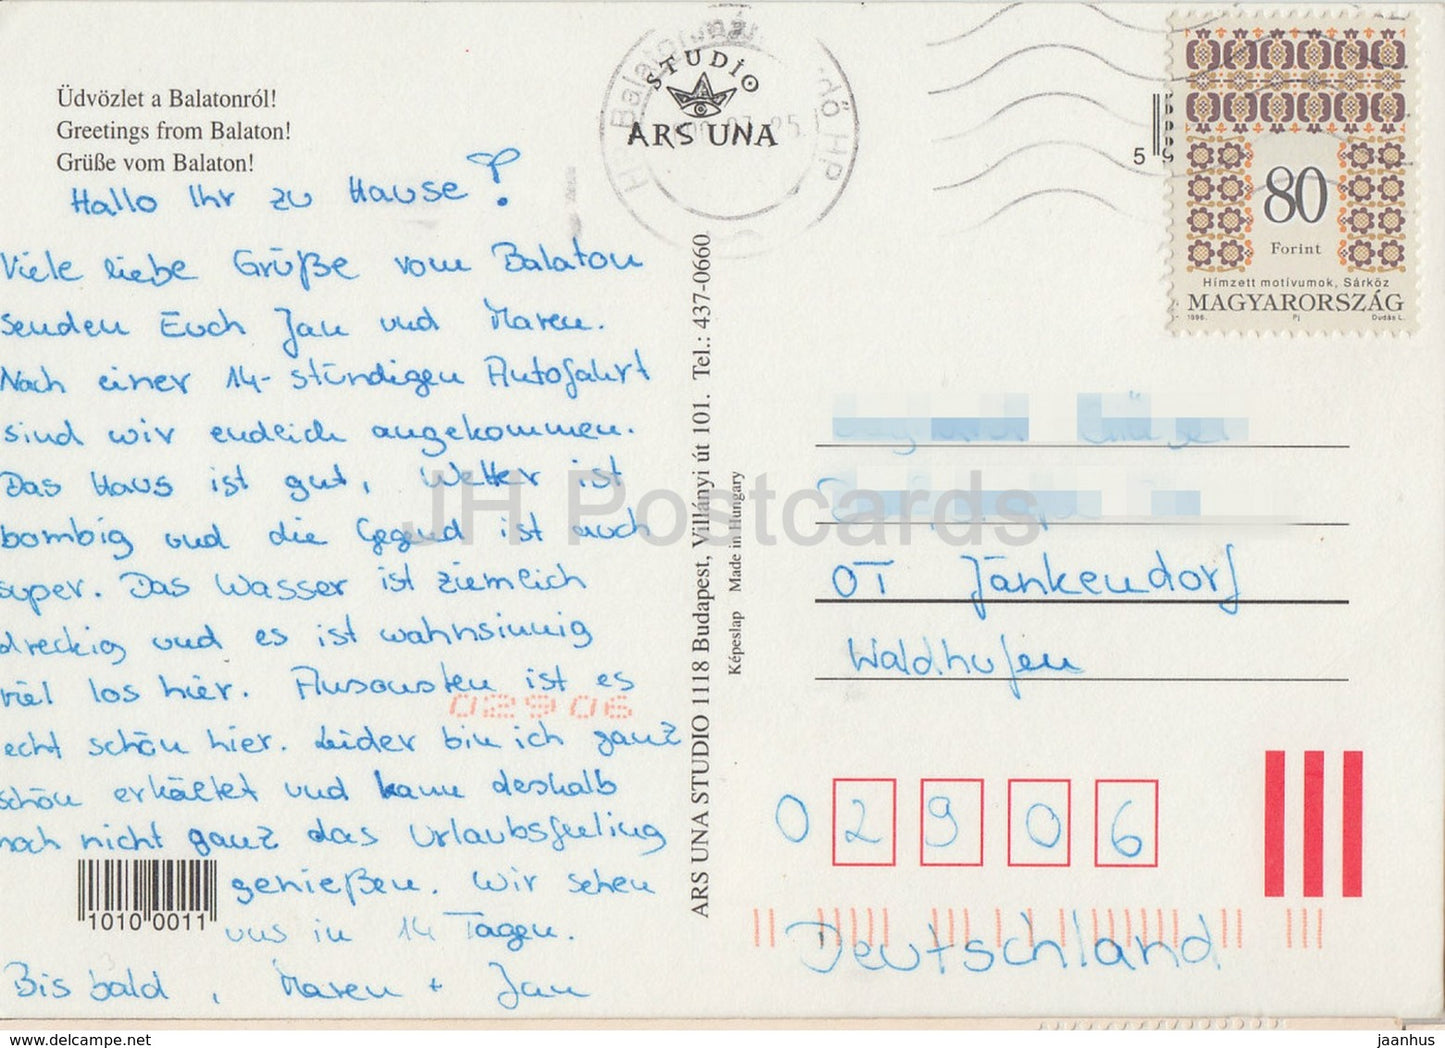 Greetings from Balaton - sailing boat - view - multiview - 2000 - Hungary - used